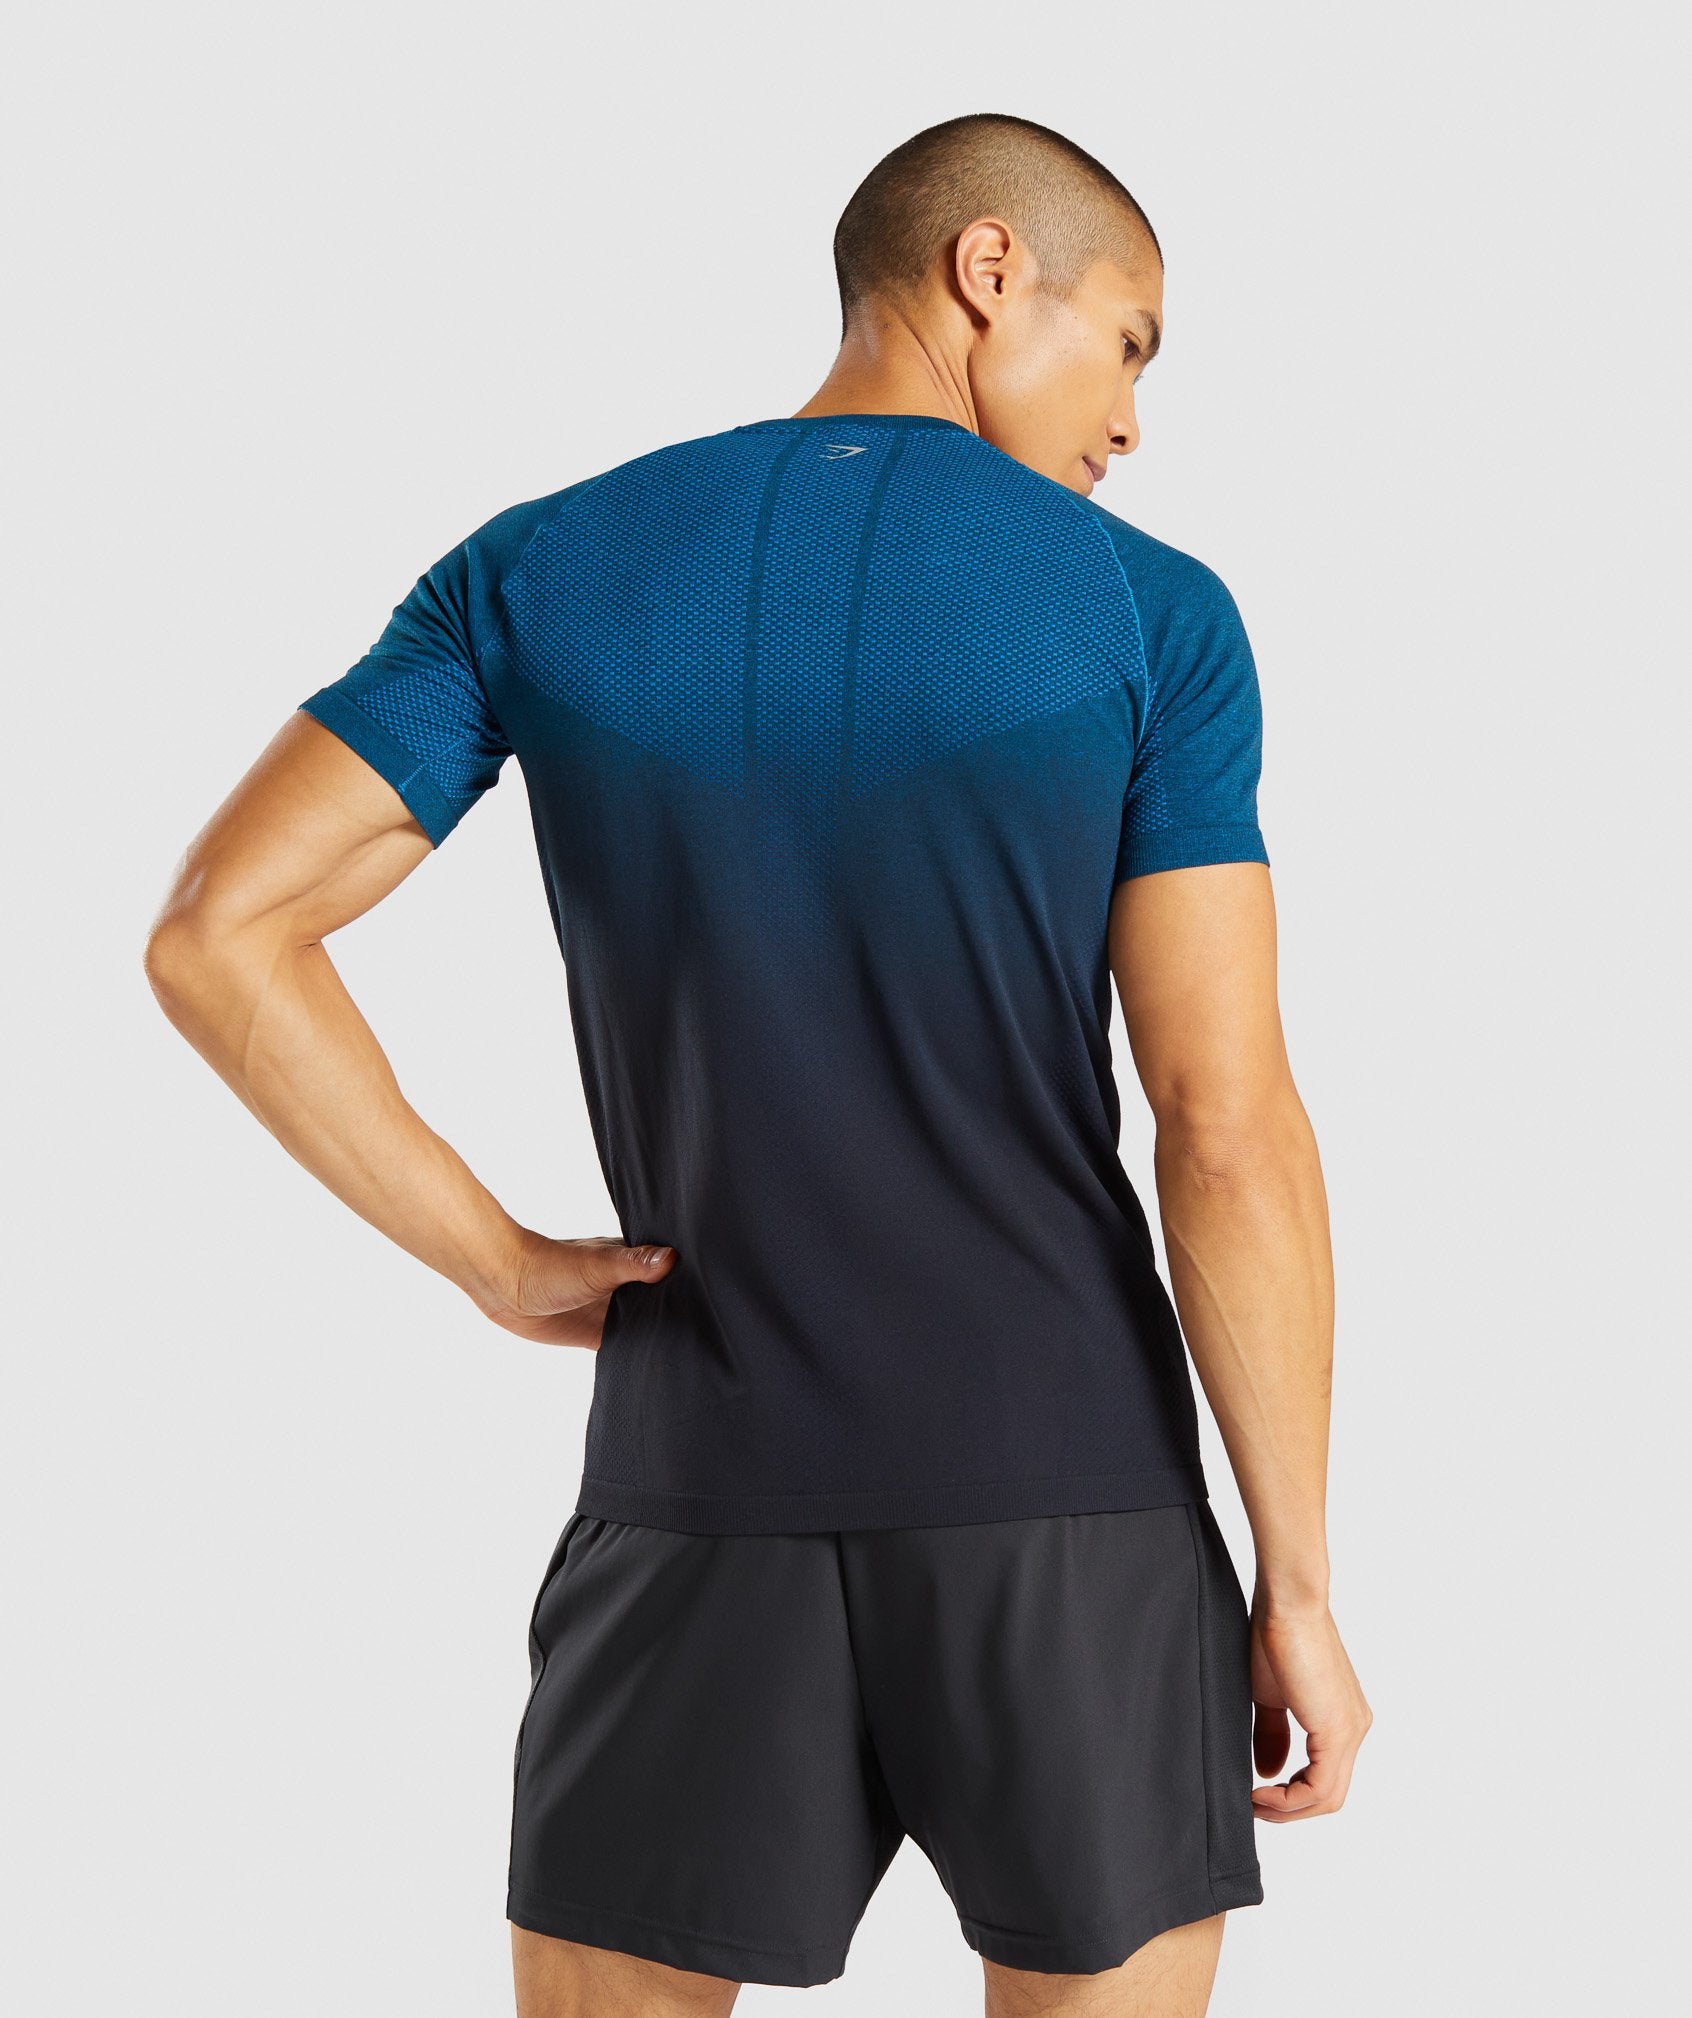 Vital Ombre Seamless T-Shirt in Teal Marl/Black - view 2